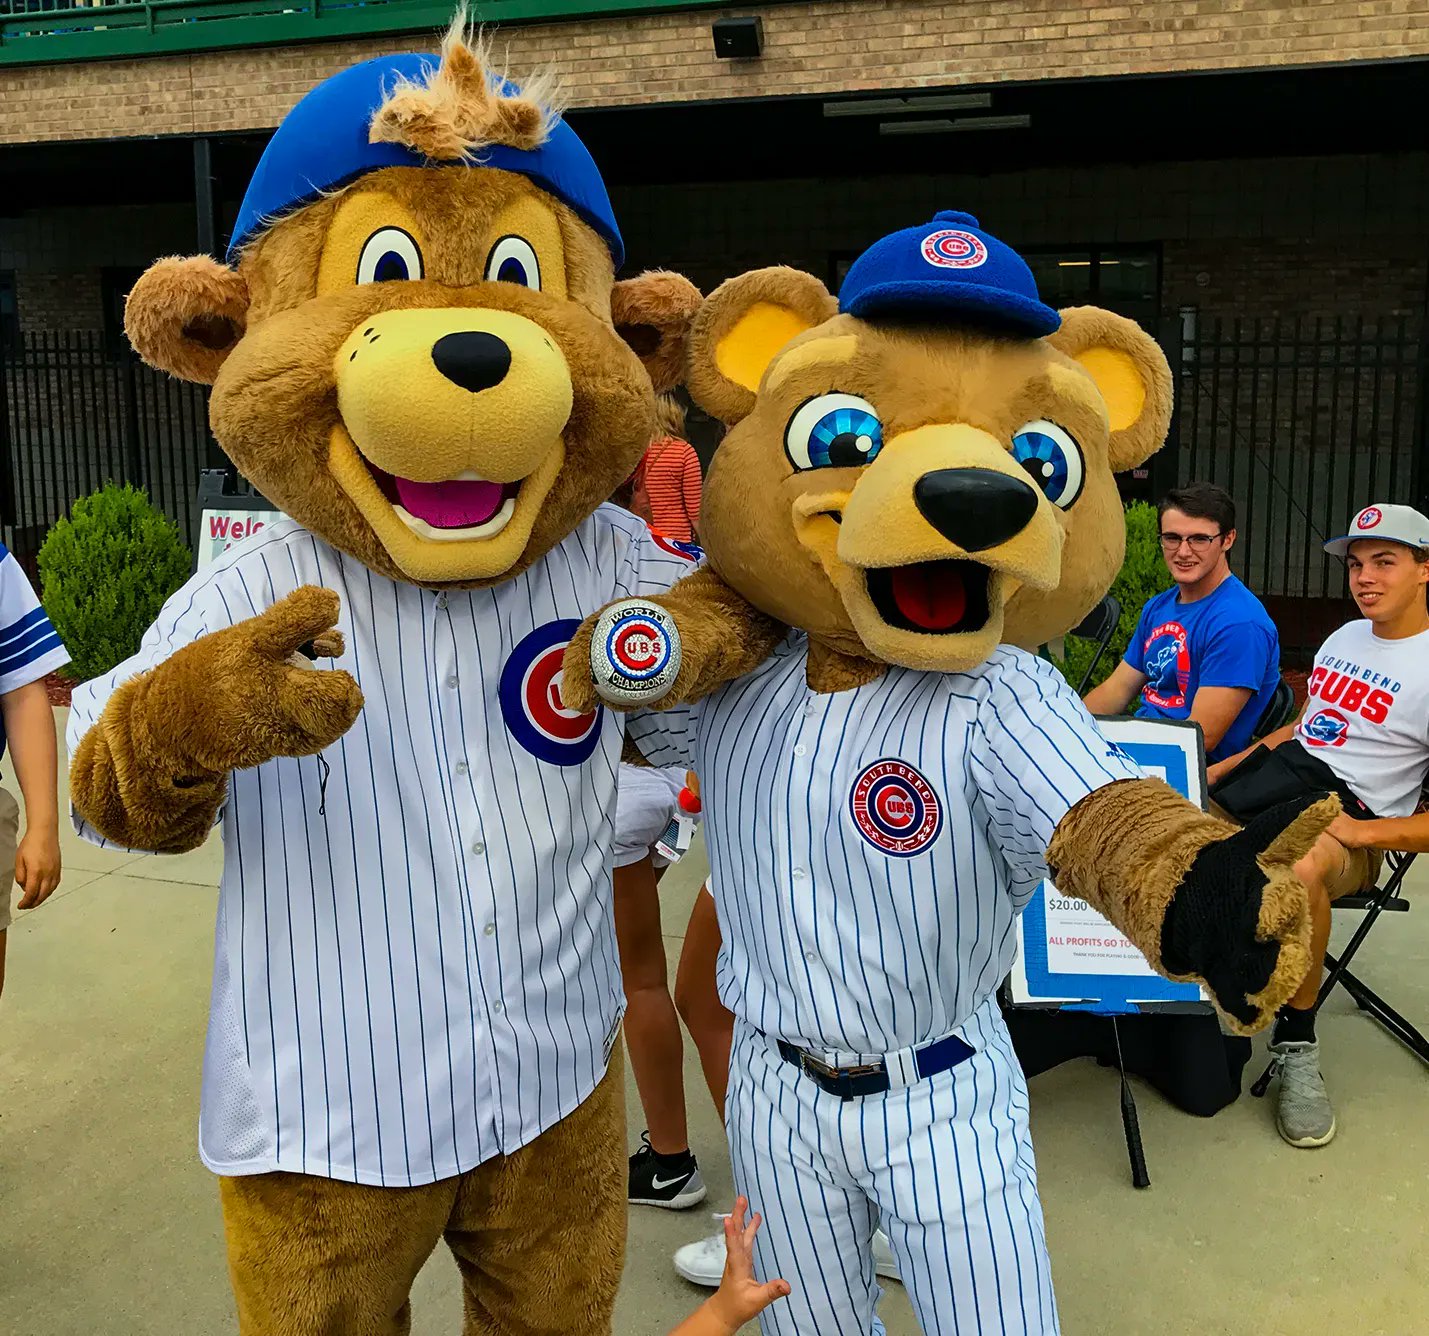 South Bend Cubs on X: REMINDER: Join us tomorrow at @FourWindsField for a  special appearance by the @Cubs mascot, @ClarktheCub as part of  #PLAYBALLWEEKEND. Clark will join Stu and Swoop for autographs